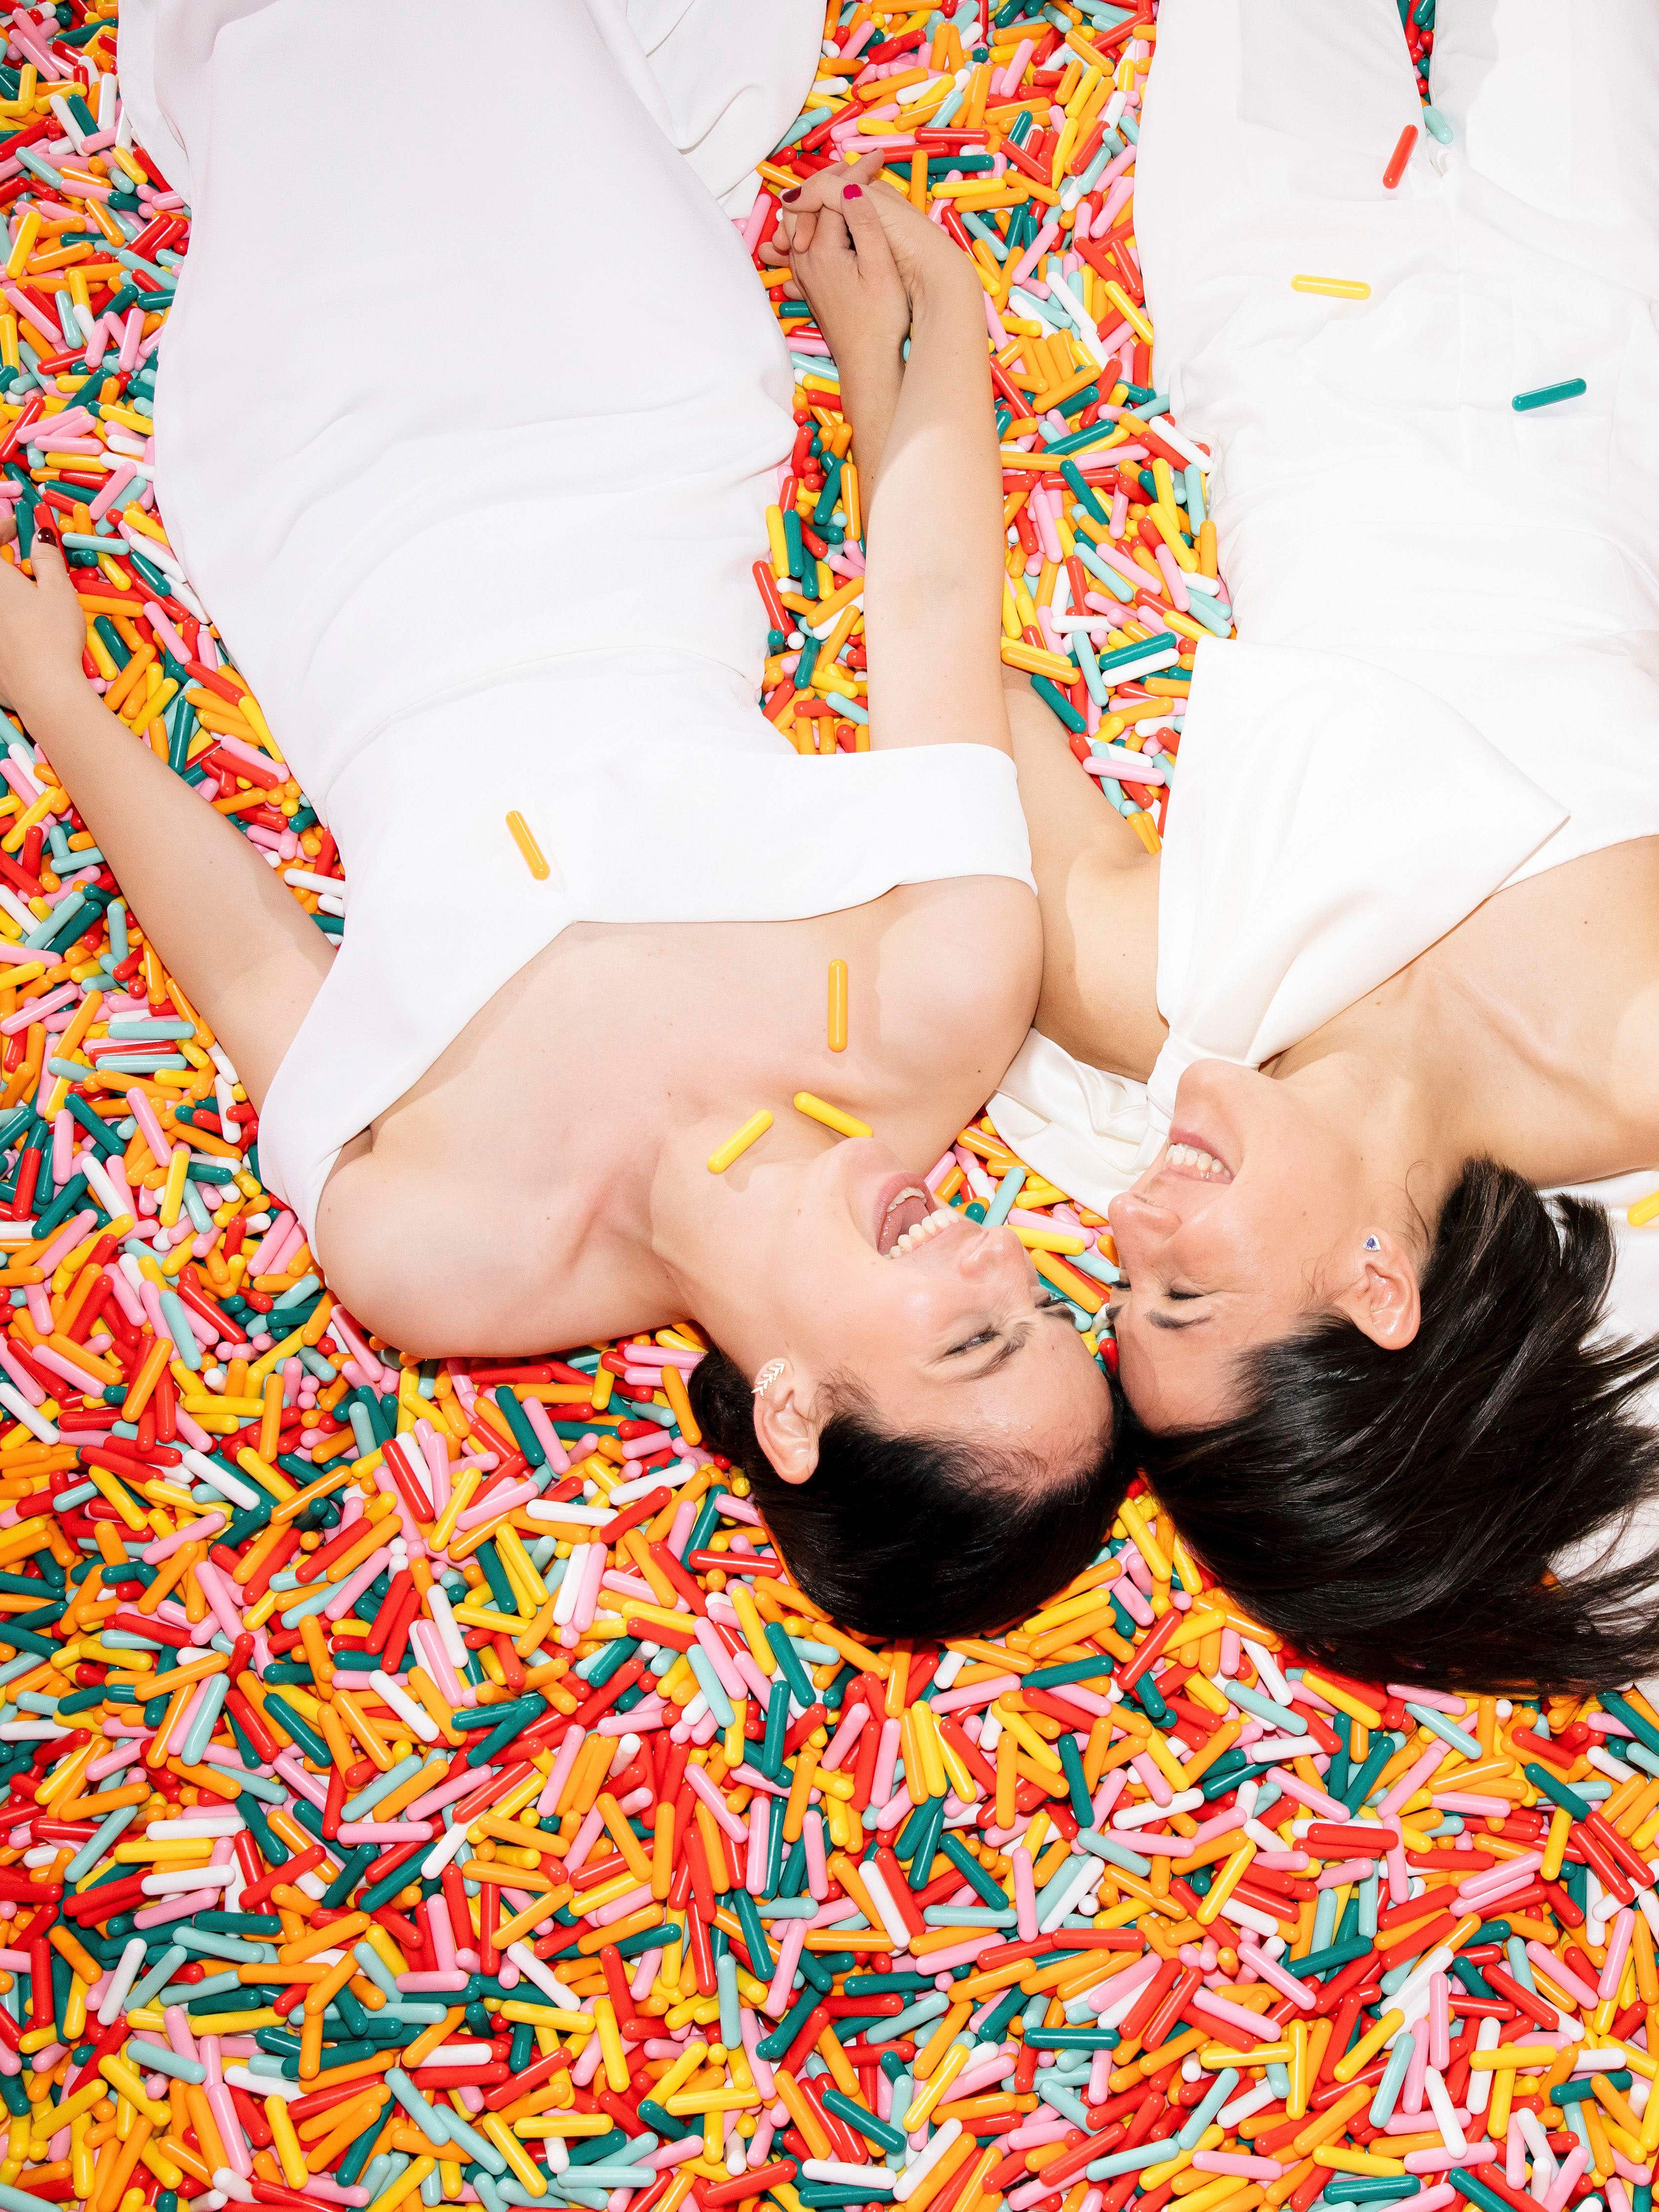 This Candy-Themed Wedding Was Every Bit as Sweet as It Sounds